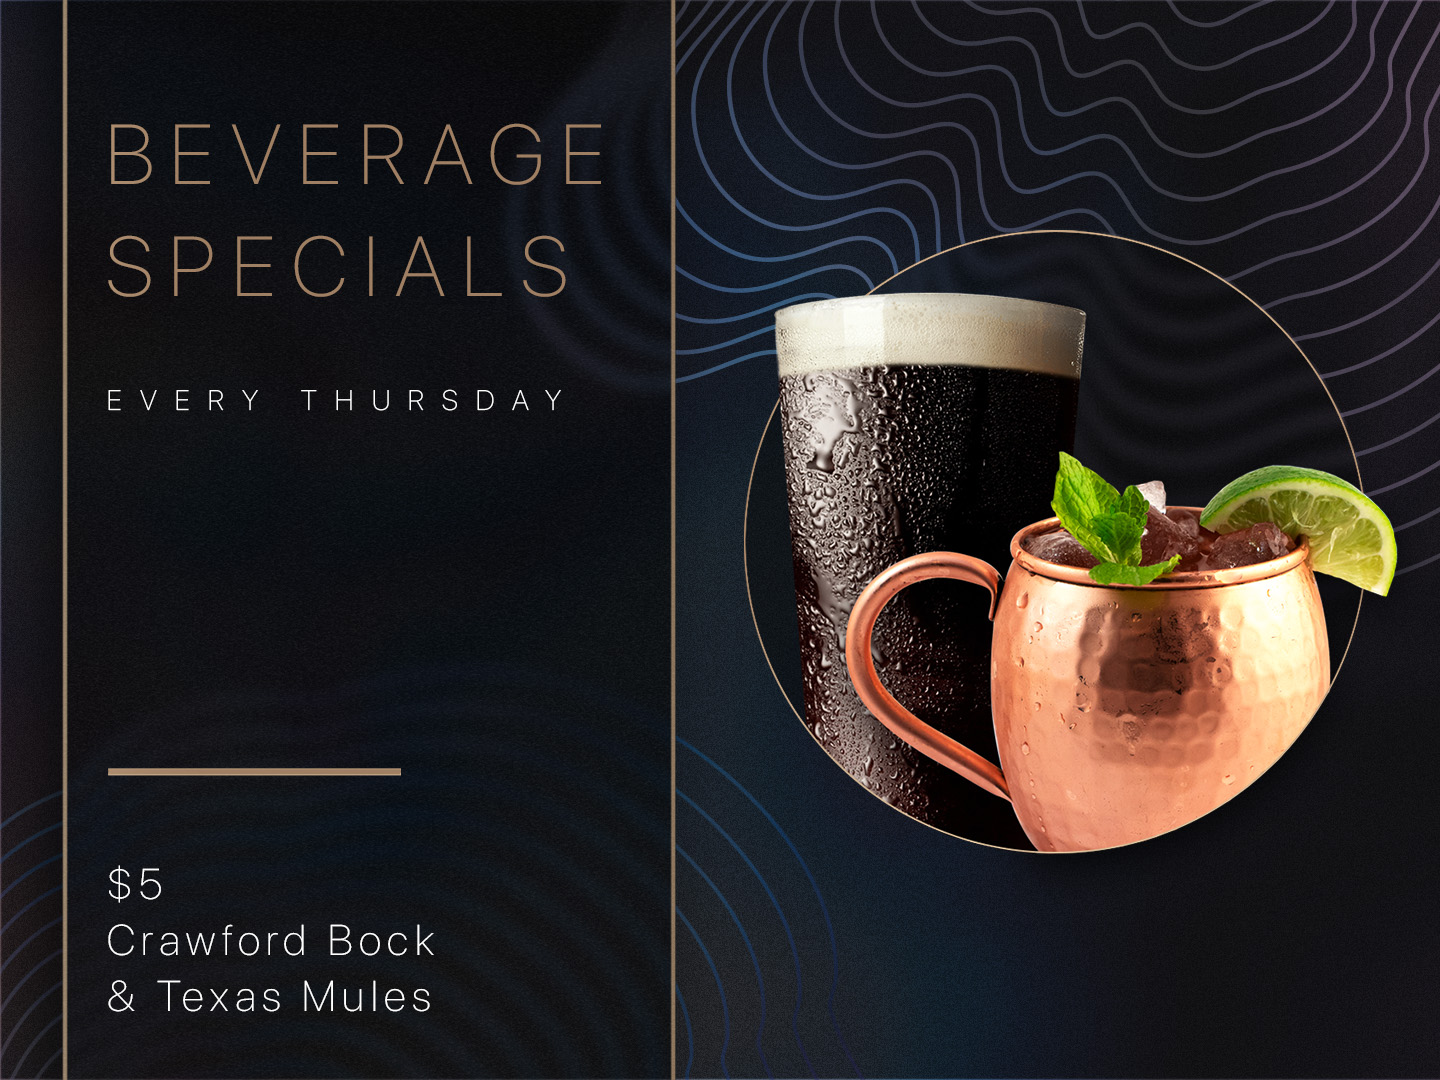 Beverage Specials. Every Thursday. $5 Crawford Bock & Texas Mules